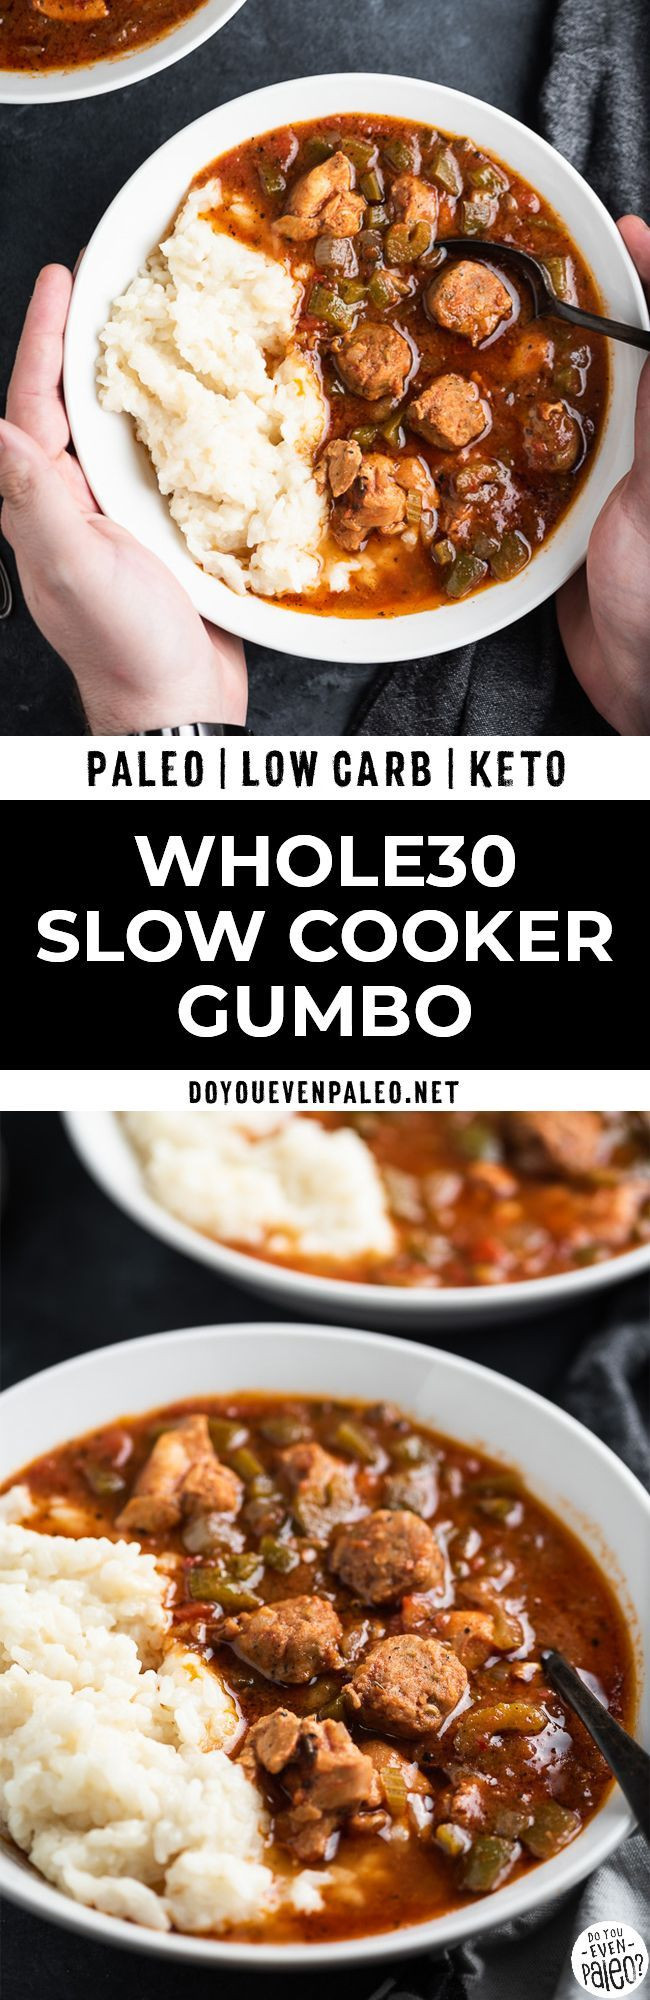 Slow Cooker Keto Gumbo
 Keto Slow Cooker Gumbo this Whole30 recipe makes a